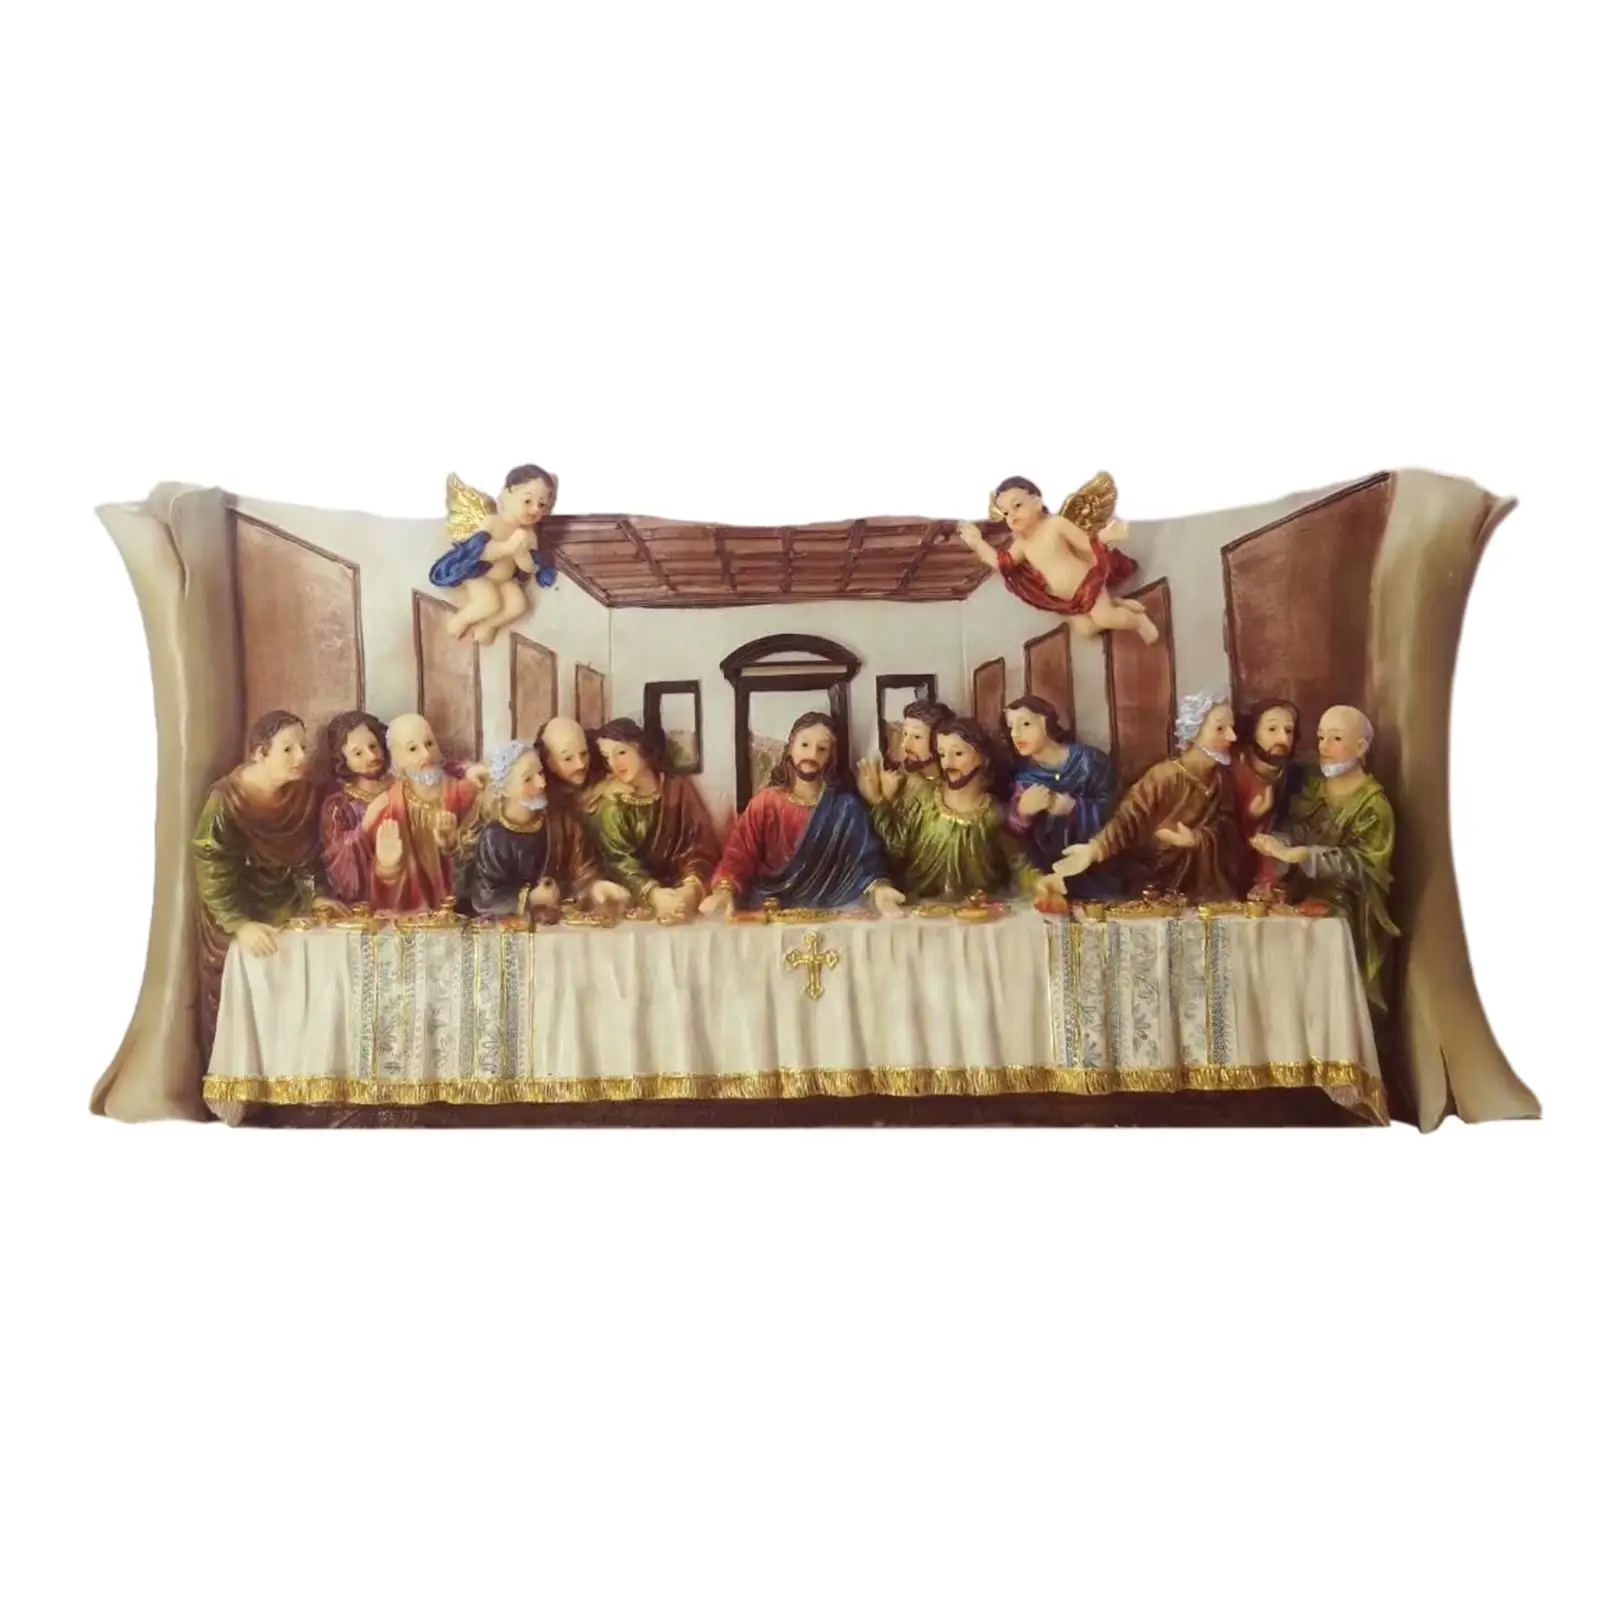 Resin Last Supper Statue Sculpture Desk Display Artwork Religious Statue Sculpture for Home Living Room Religious Gift Ornaments